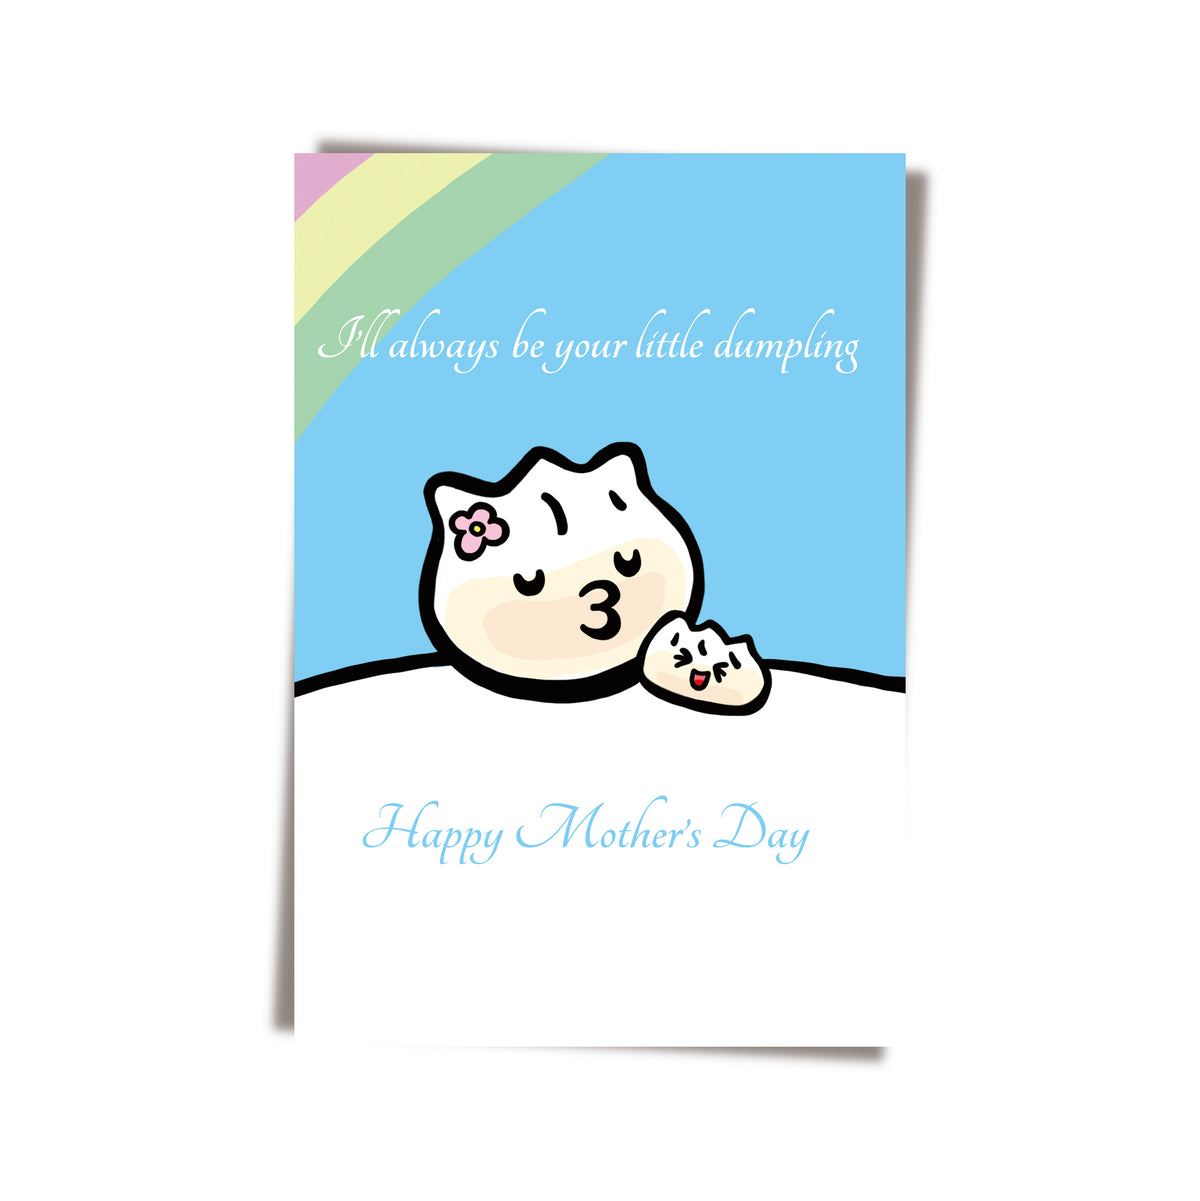 GREETING CARD: MOTHER'S DAY - Dumplings